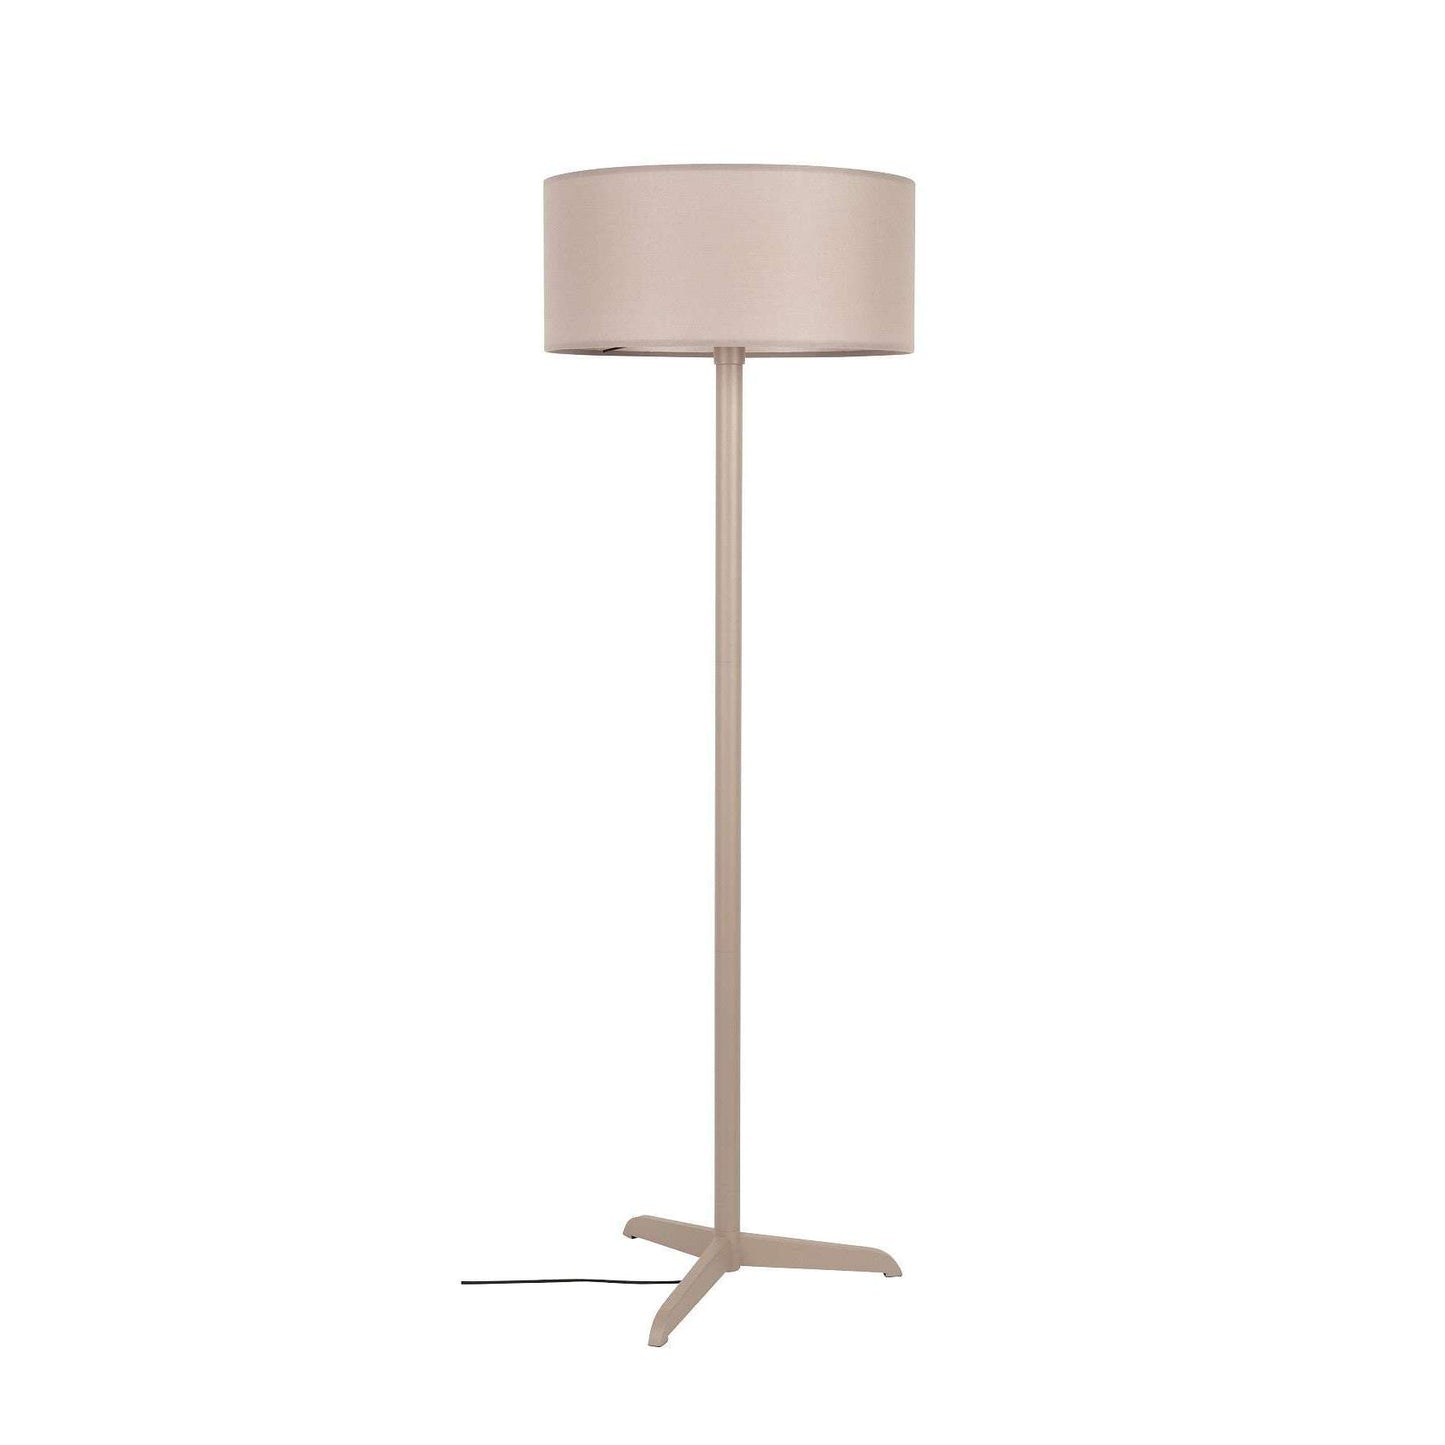 Zuiver vloerlamp shelby taupe Ø50 x 155 cm